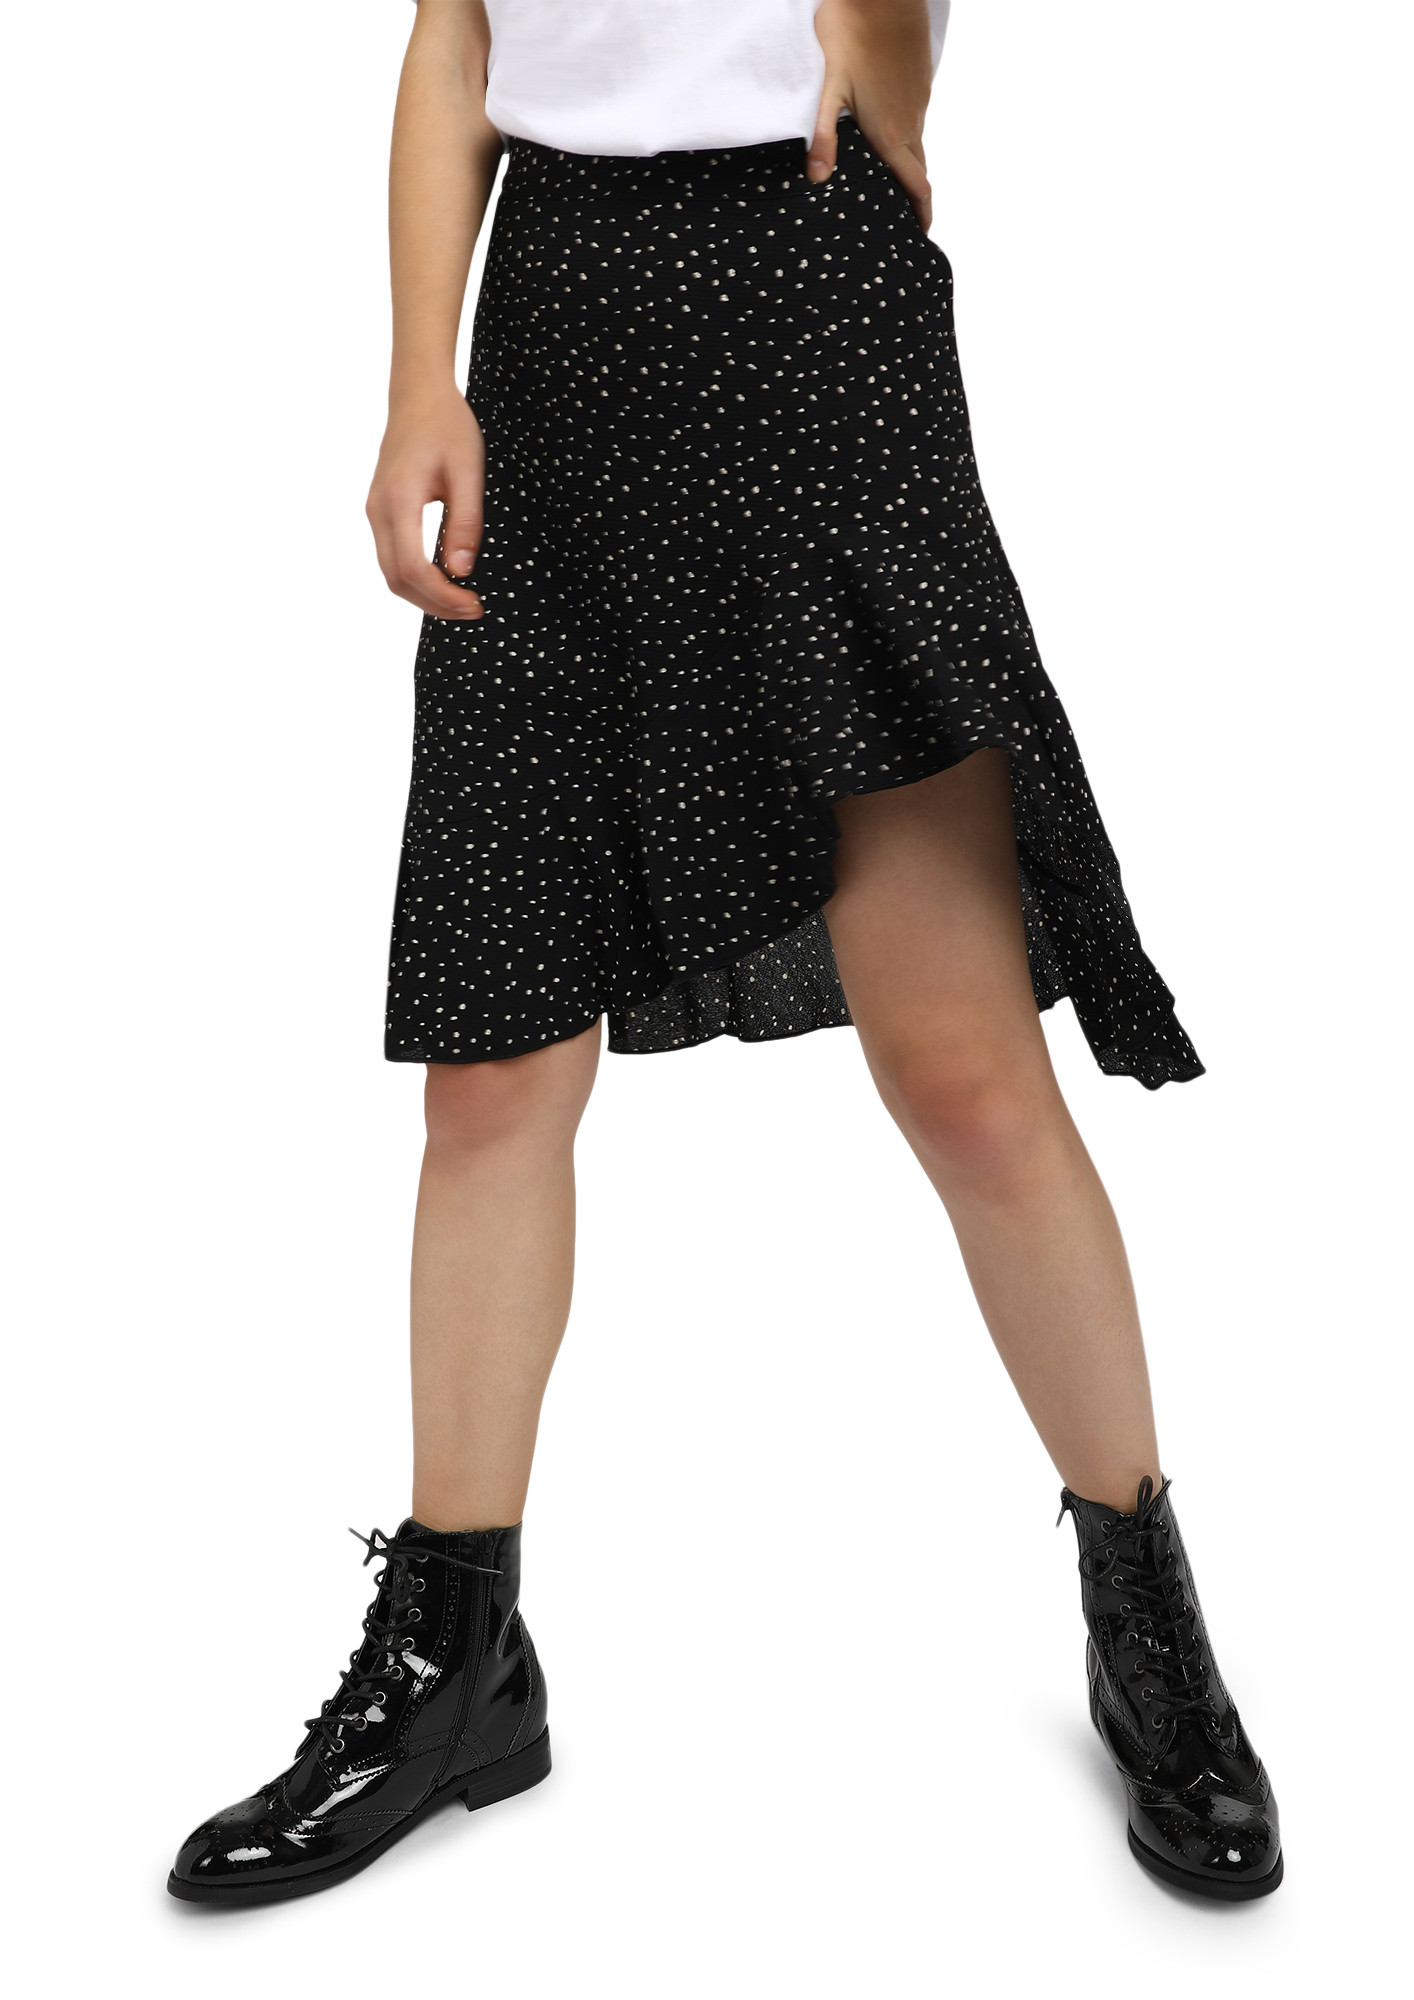 FOR A SWEET HOLIDAY BLACK MIDI SKIRT